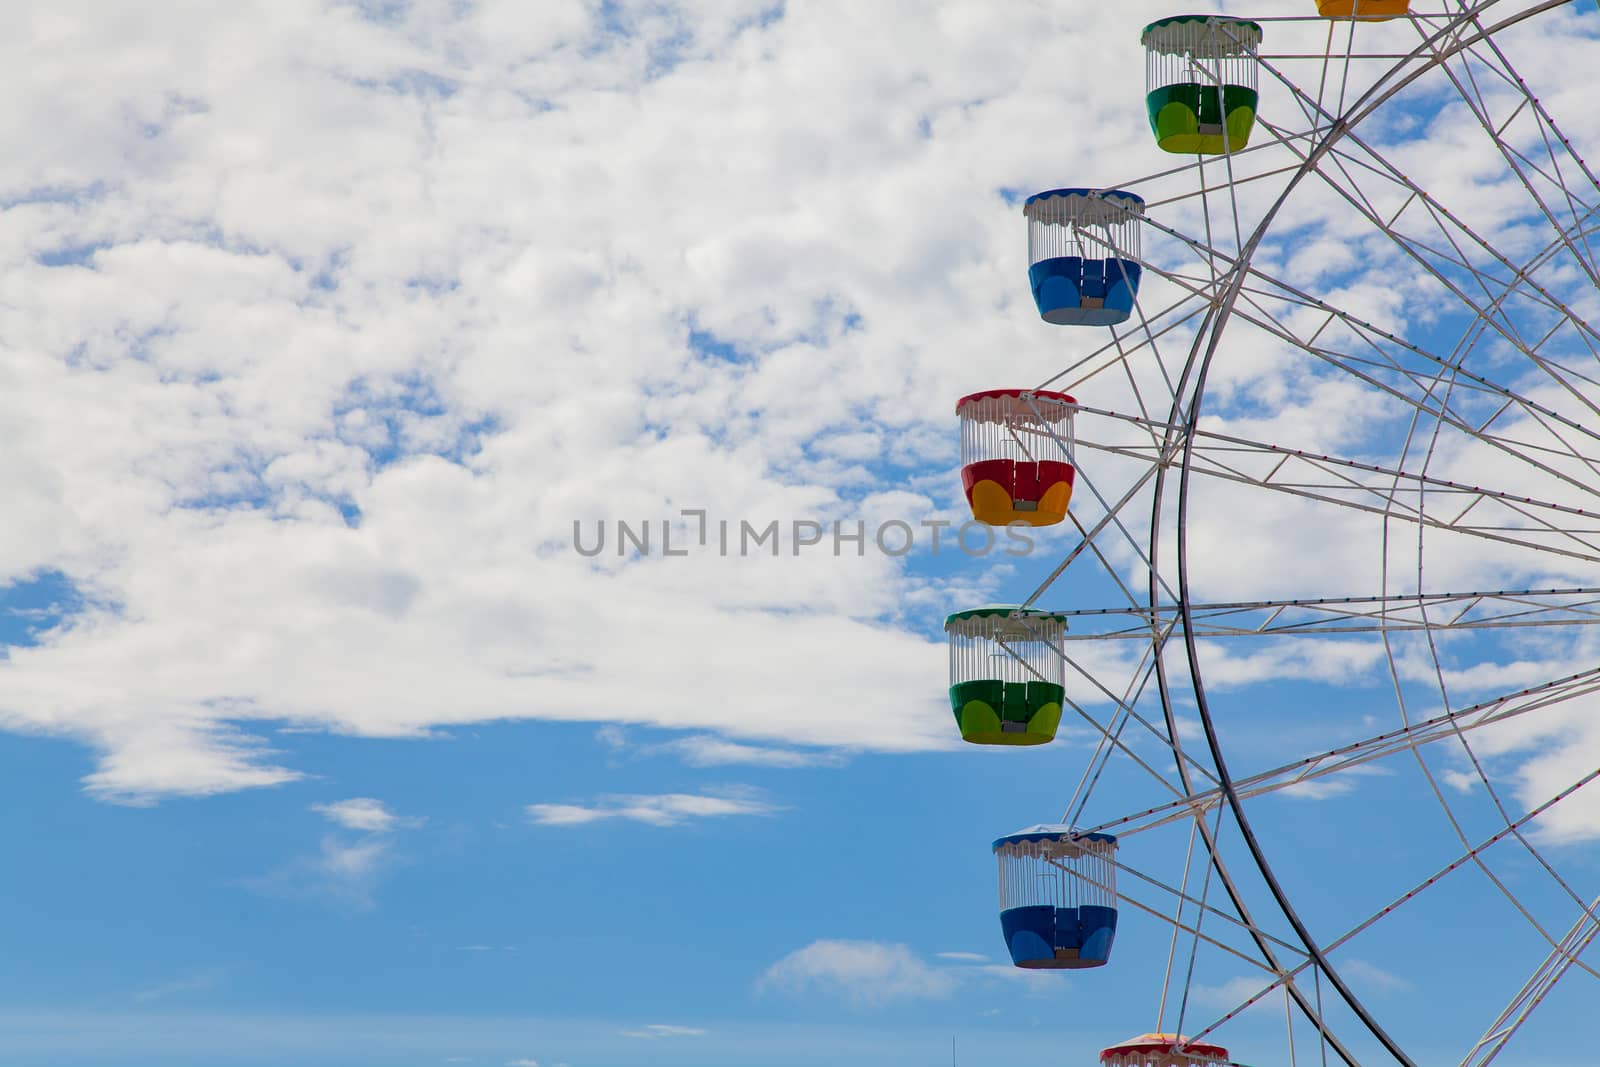 Gondolas of ferris wheel, very colourful, against blue sky with clouds by kgboxford